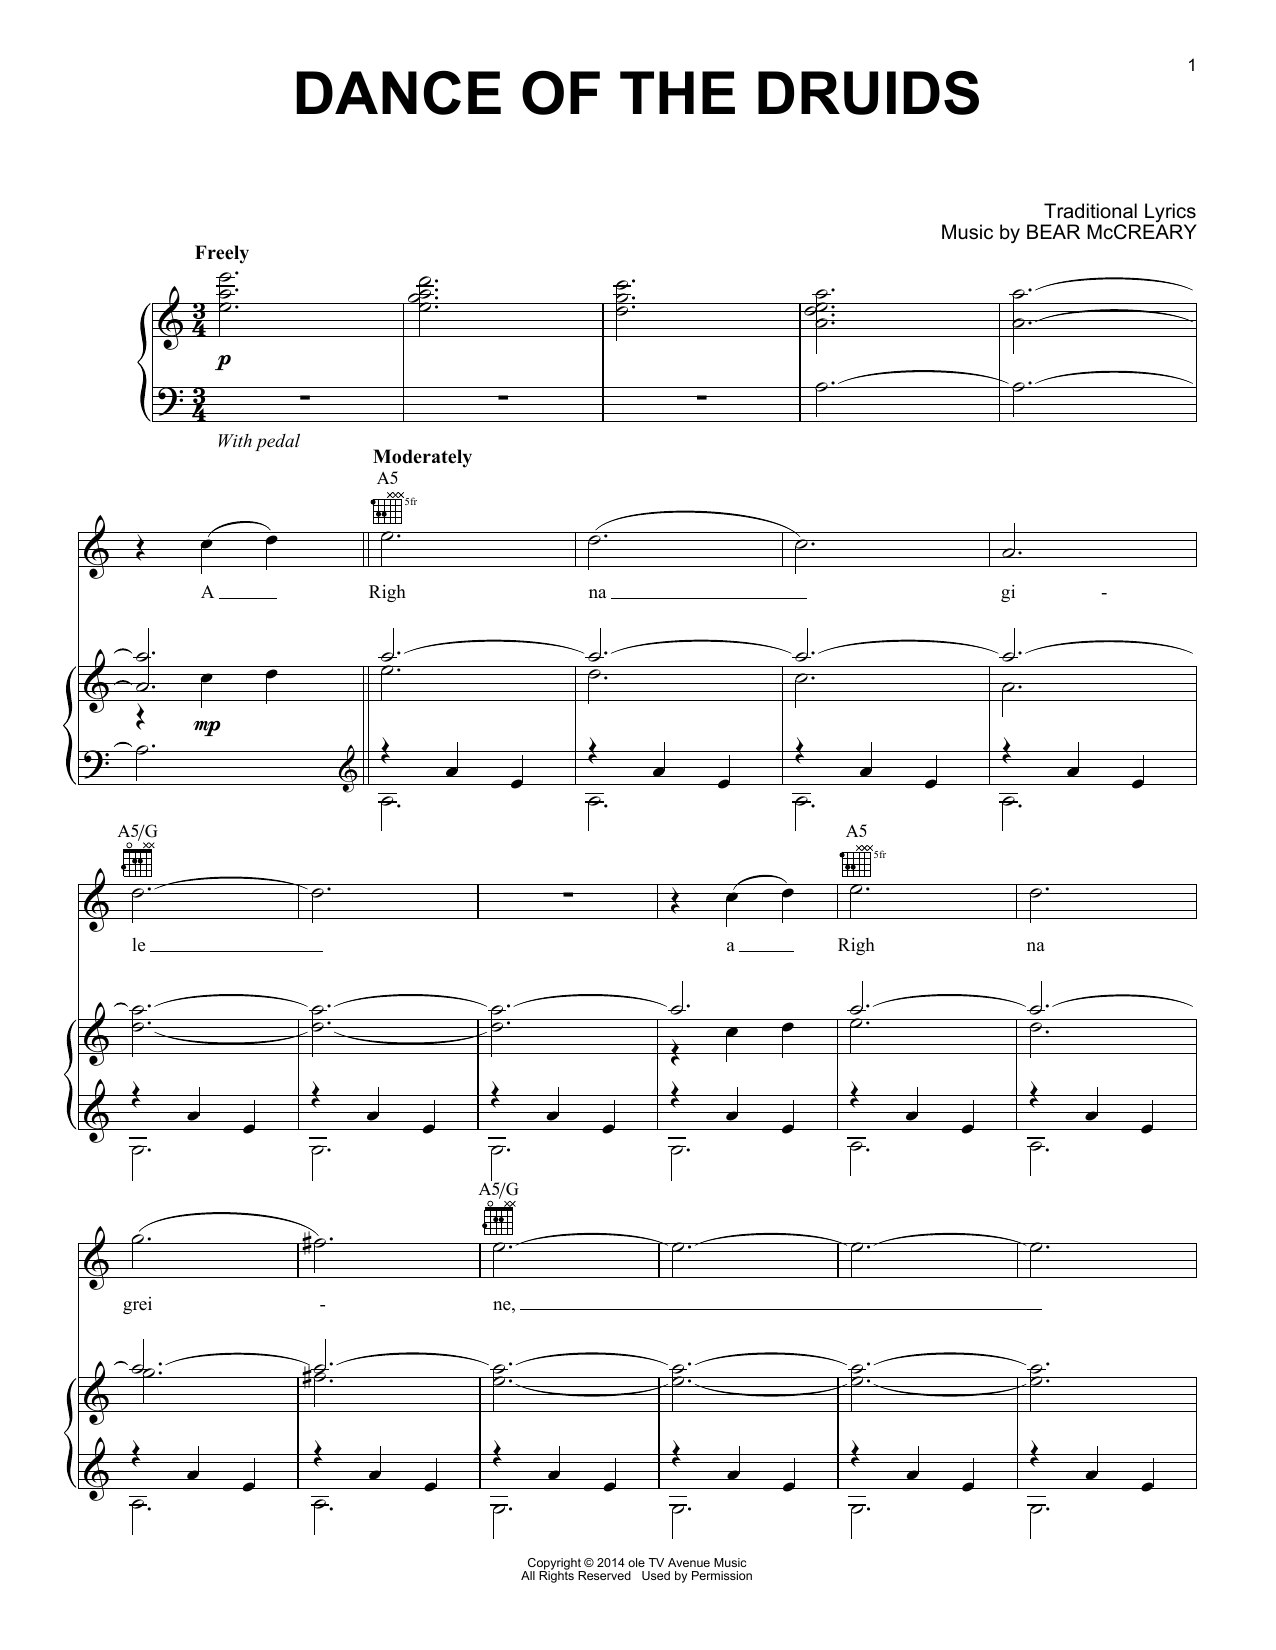 Bear McCreary "Dance Of The Druids (from Outlander)" Sheet Music PDF Notes, Chords | Film/TV Score Piano Solo Download Printable. 418721